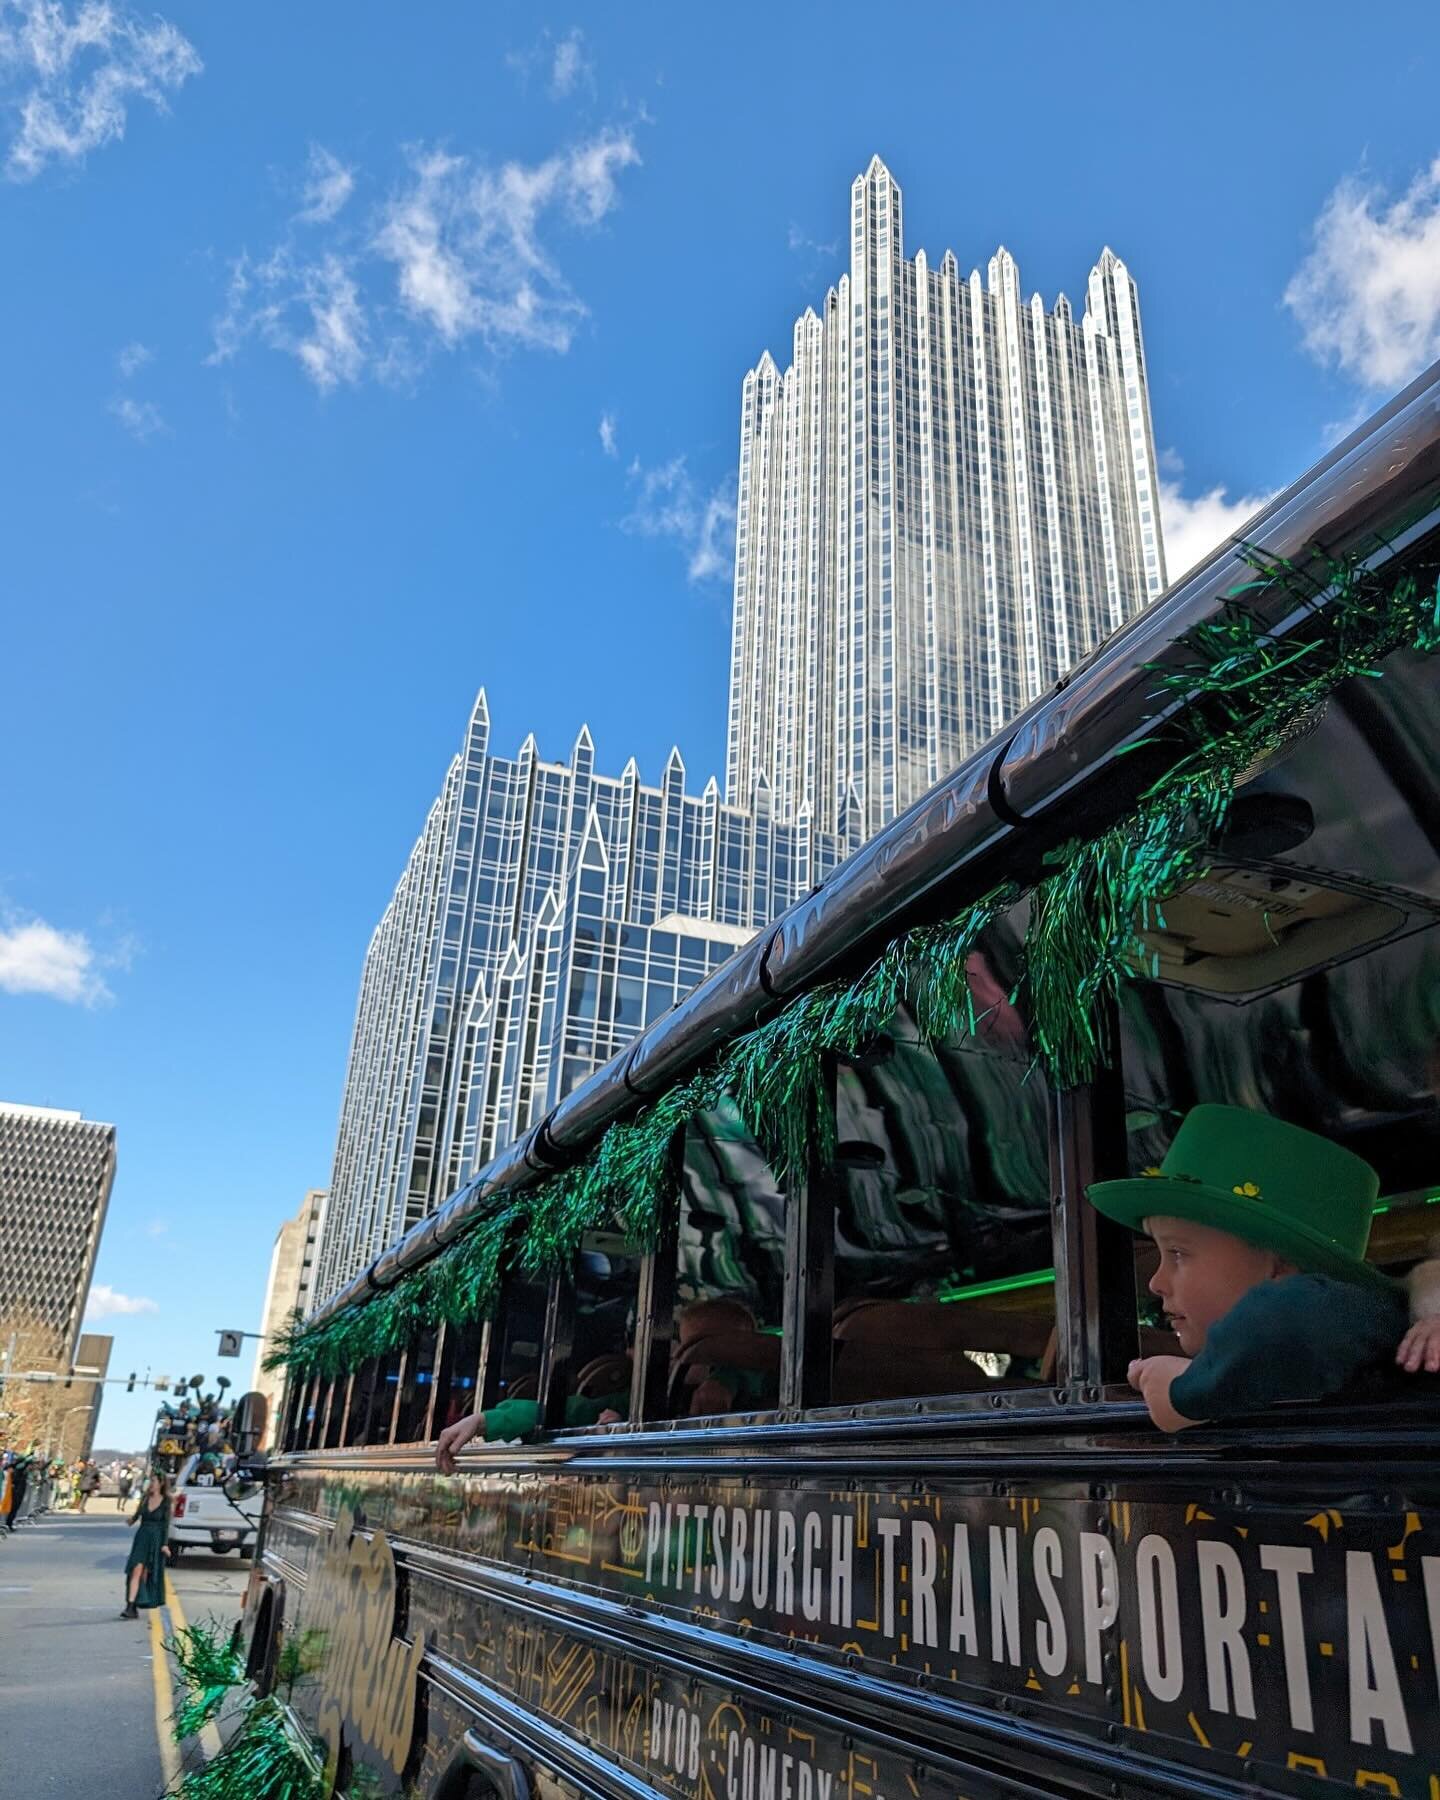 ☘️Happy St. Patrick&rsquo;s Day, Pittsburgh☘️

#pittsburgh #pgh #412 #burghbus #lovepgh #theburgh #stpaddys #stpaddysday #pittsburghstpatricksdayparade #pittsburghstpatricksday #meluckycharms